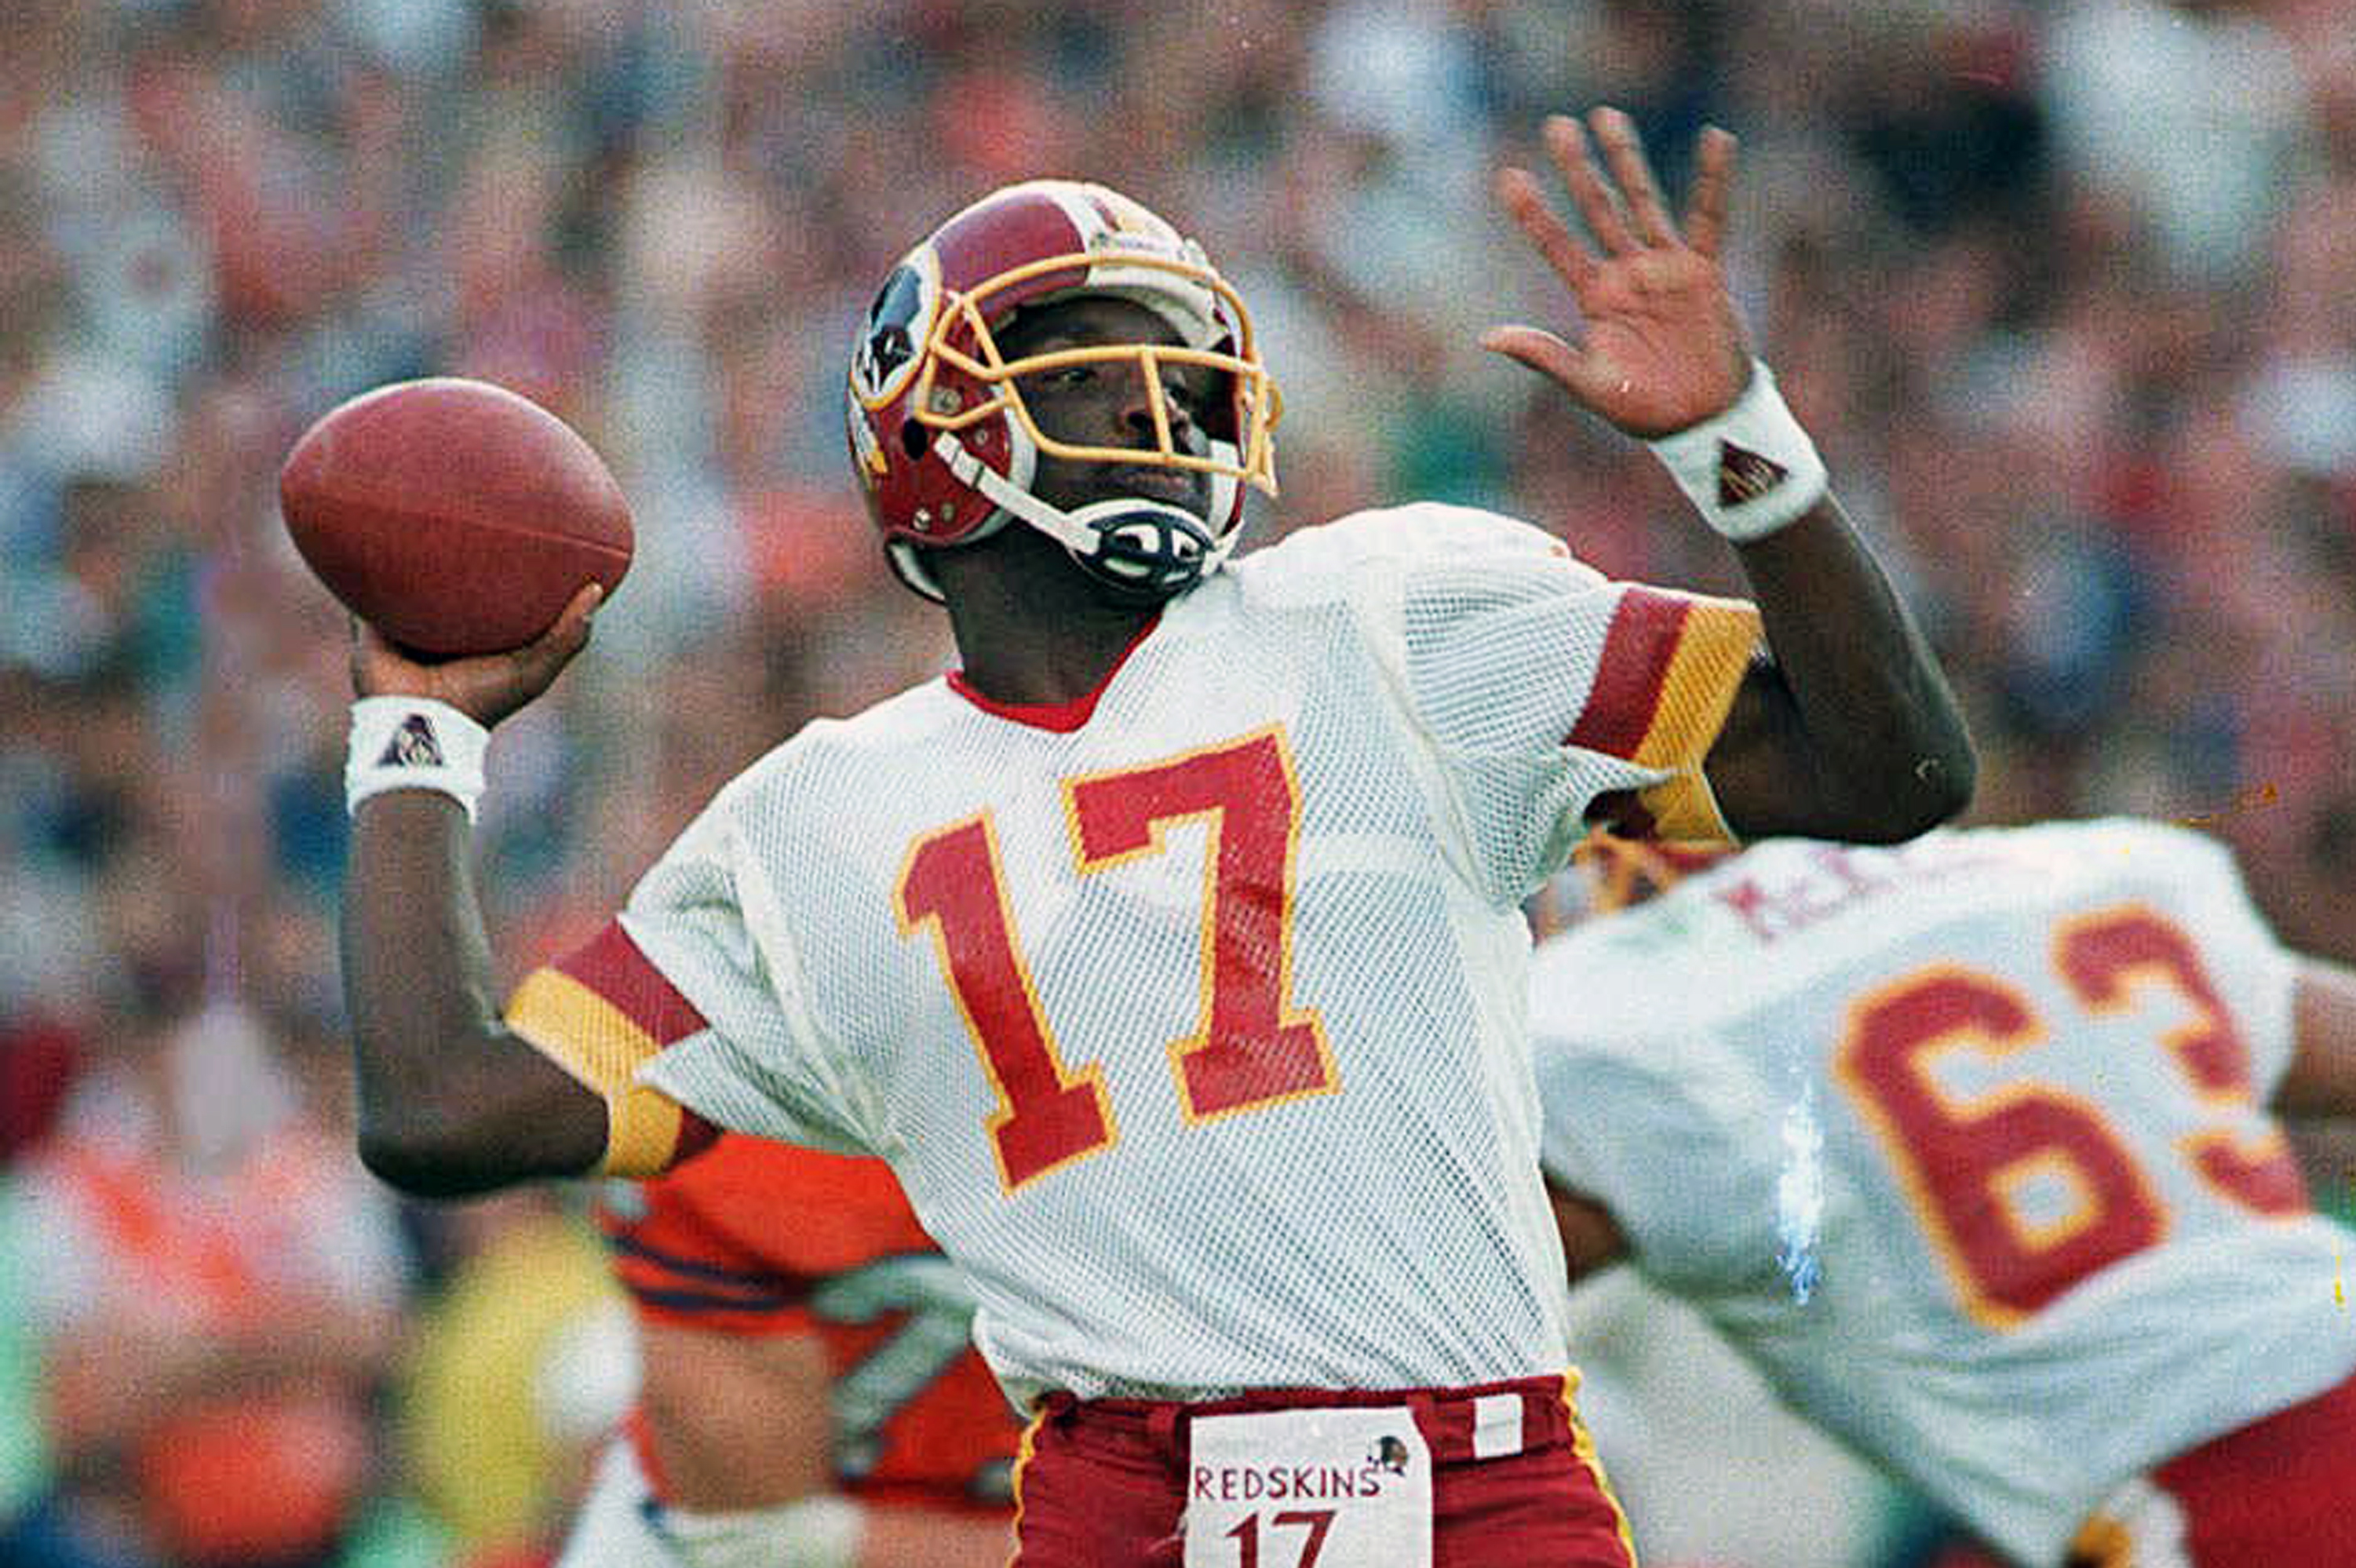 NFL - In 1988, Doug Williams became the first African-American QB to start  and win a Super Bowl. Williams threw for four TDs and earned Super Bowl  XXII MVP. #BlackHistoryMonth